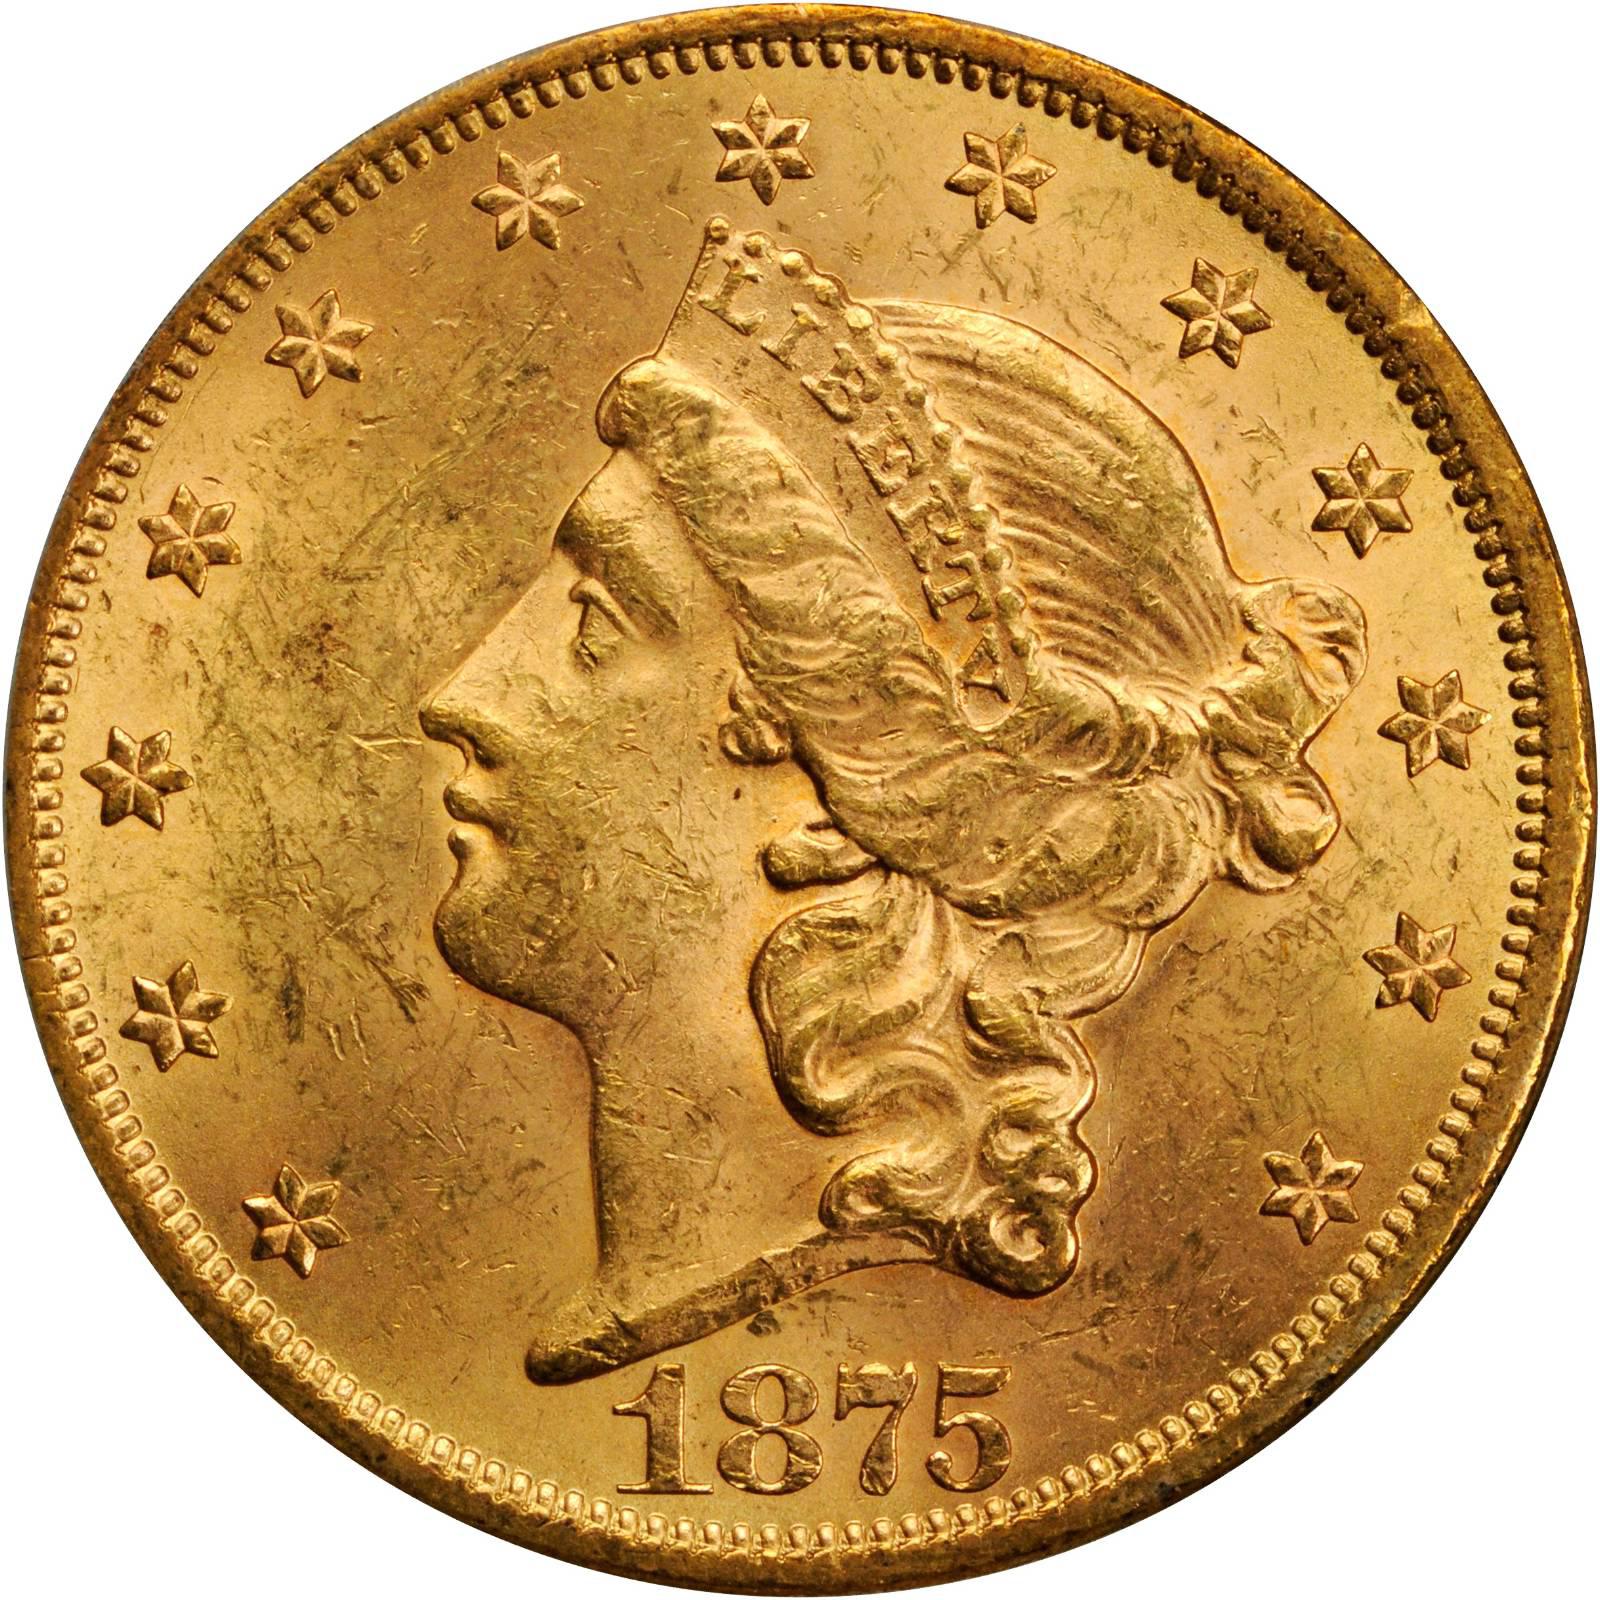 us gold coin history